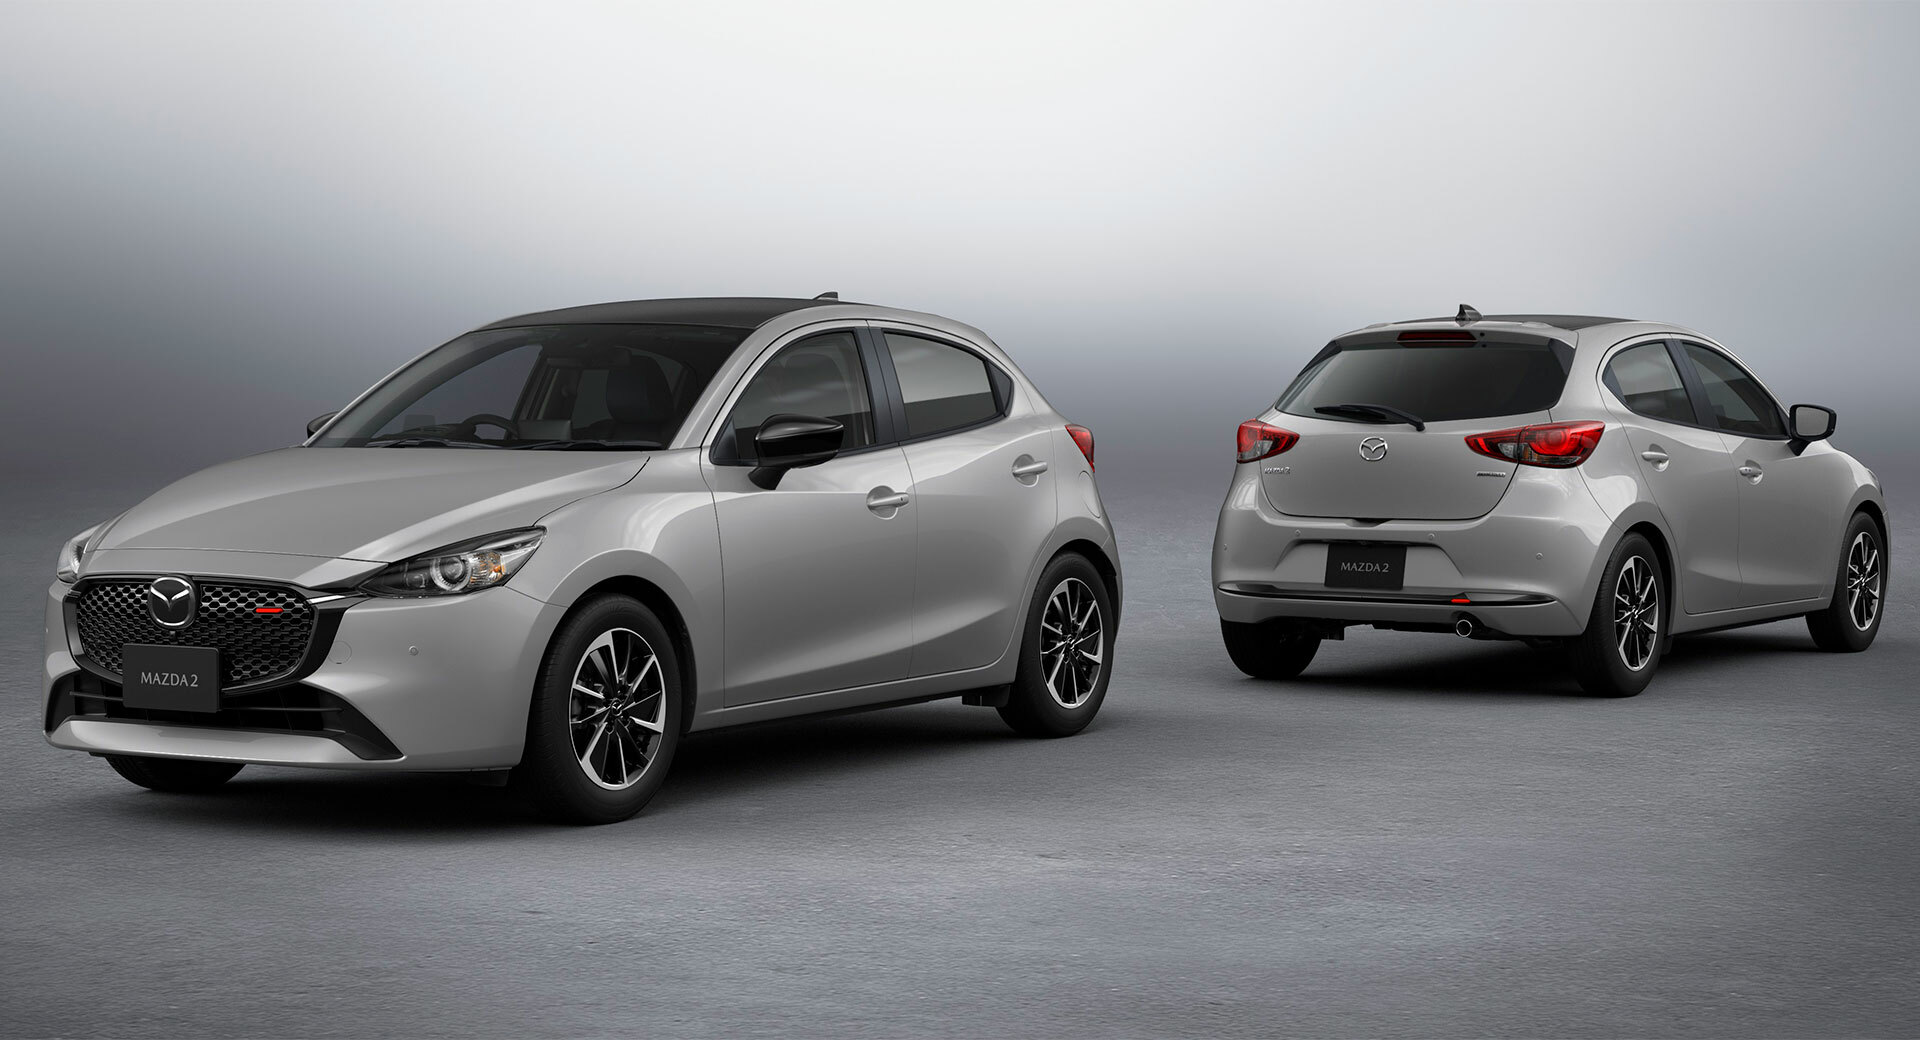 2024 Mazda2 Undergoes A Subtle Facelift For City Car Buyers | Carscoops